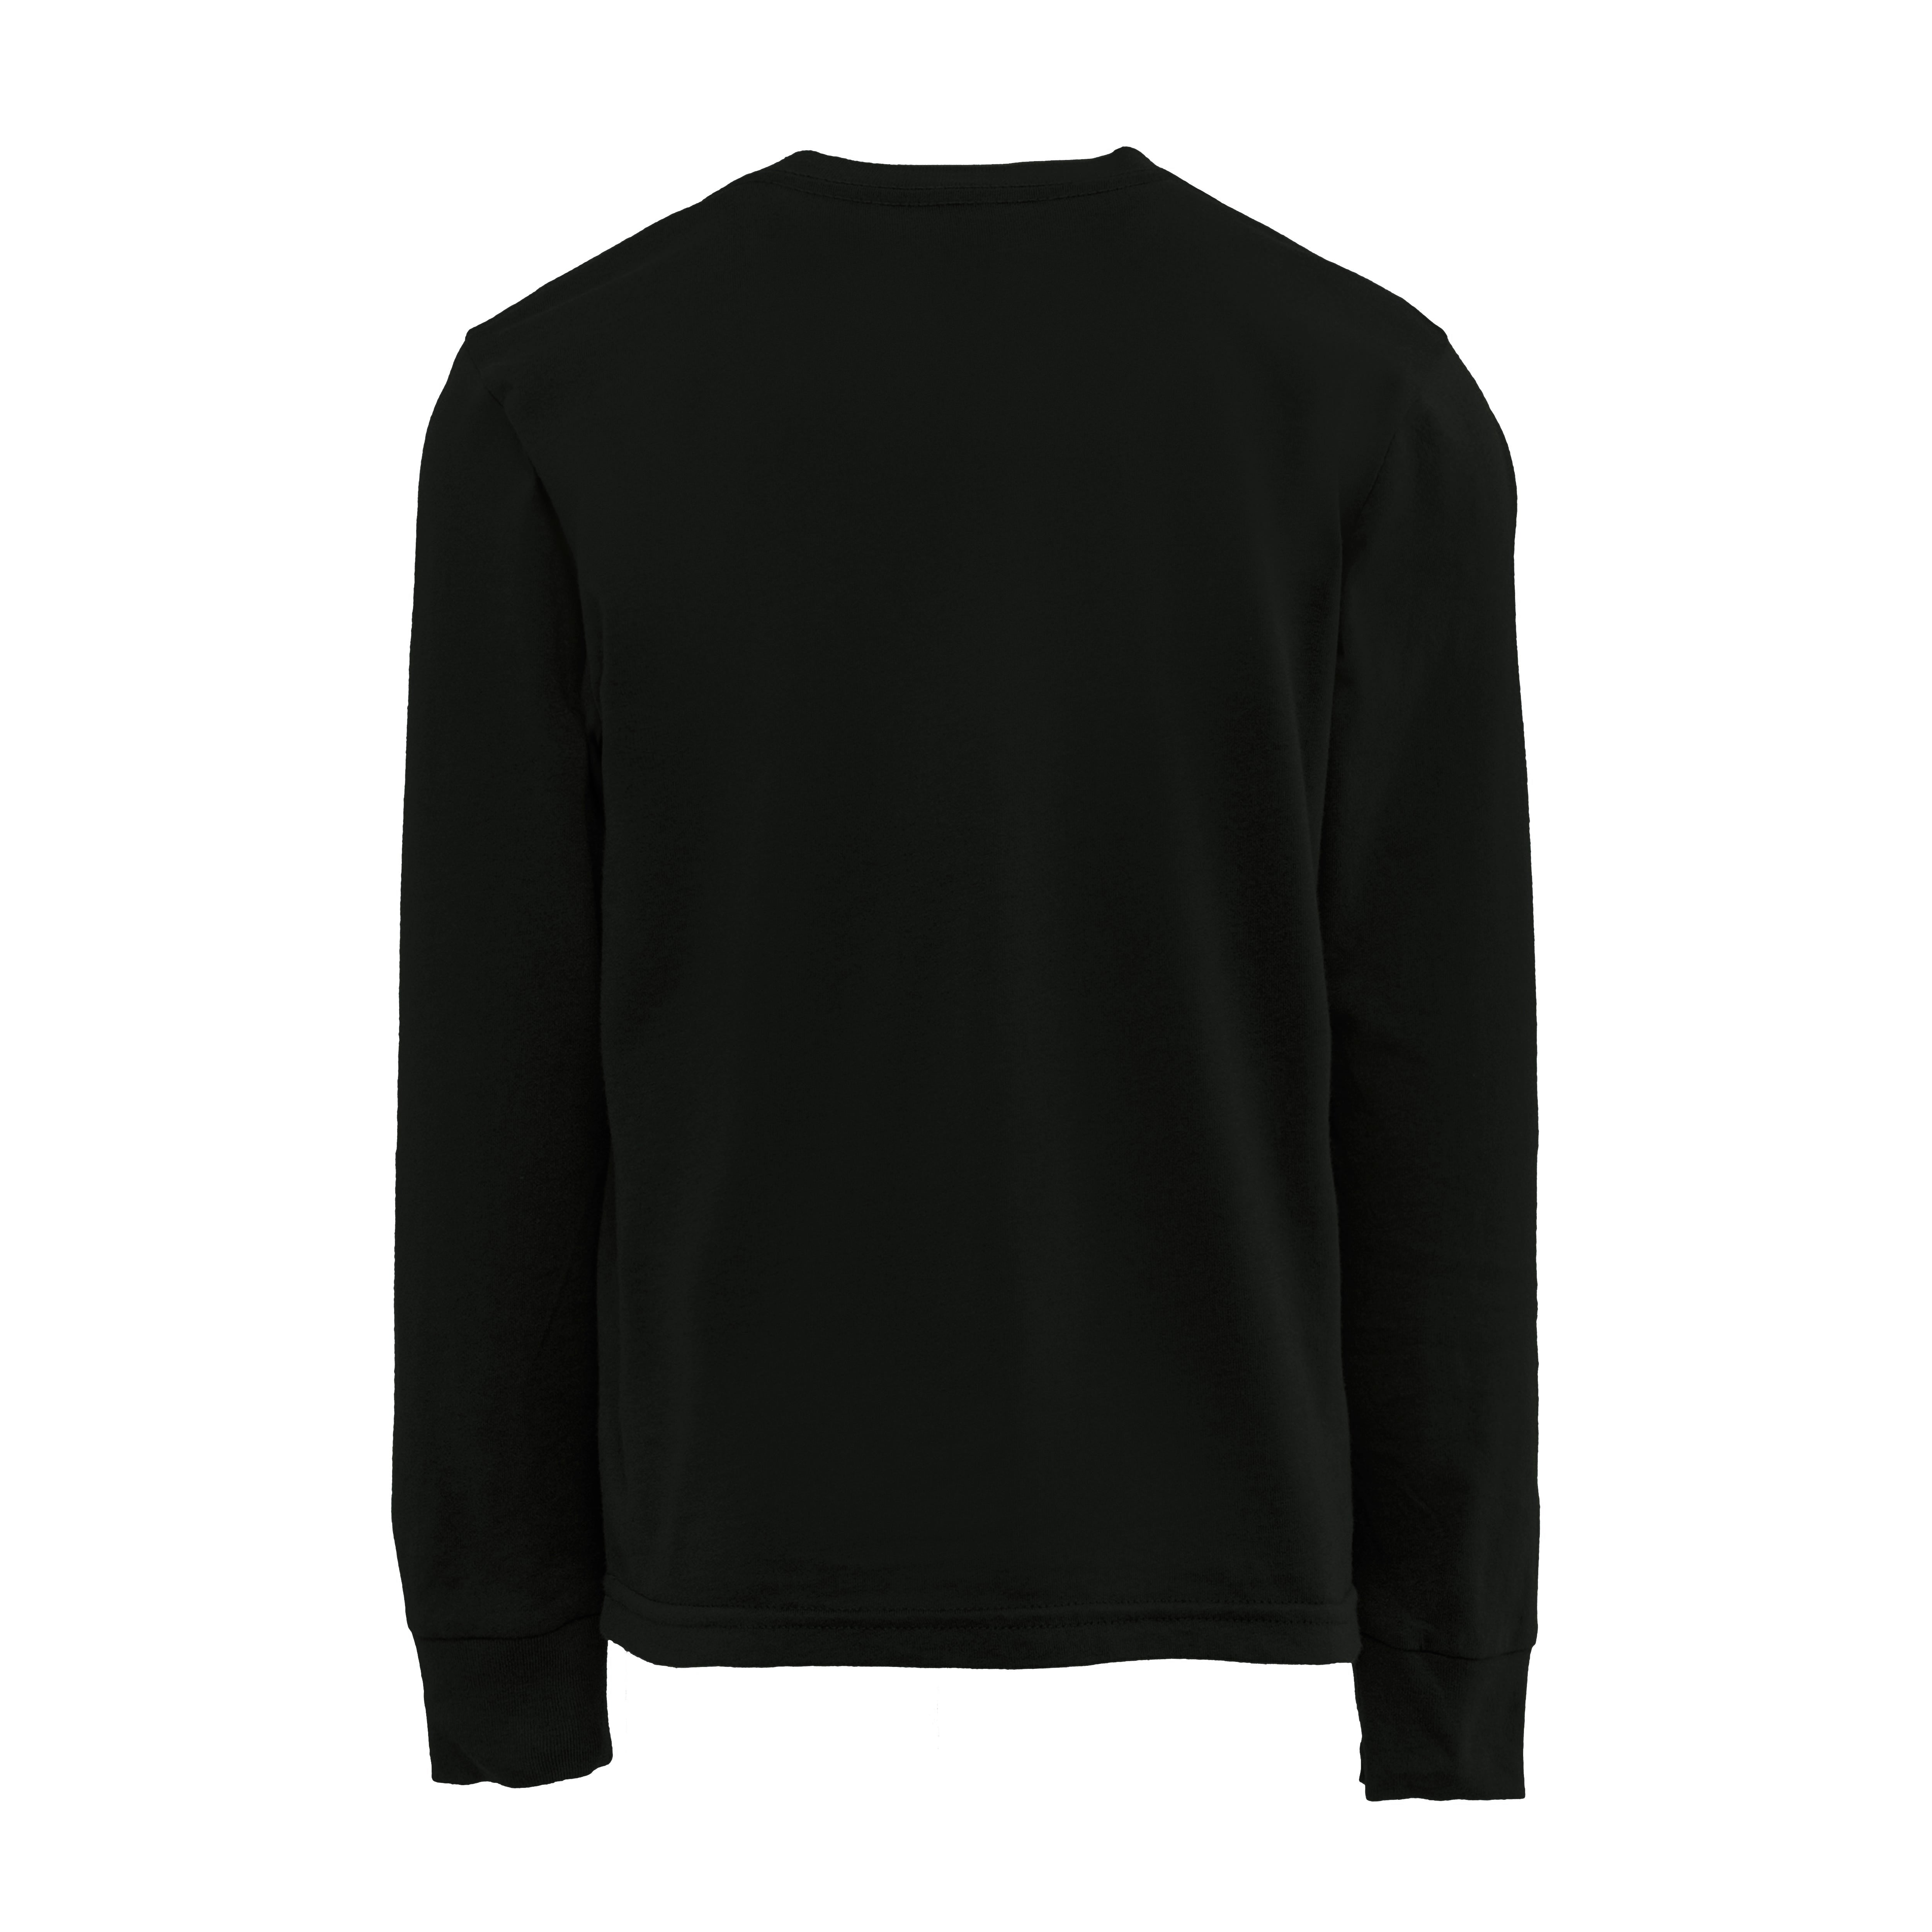 Youth cotton long sleeve T-shirt